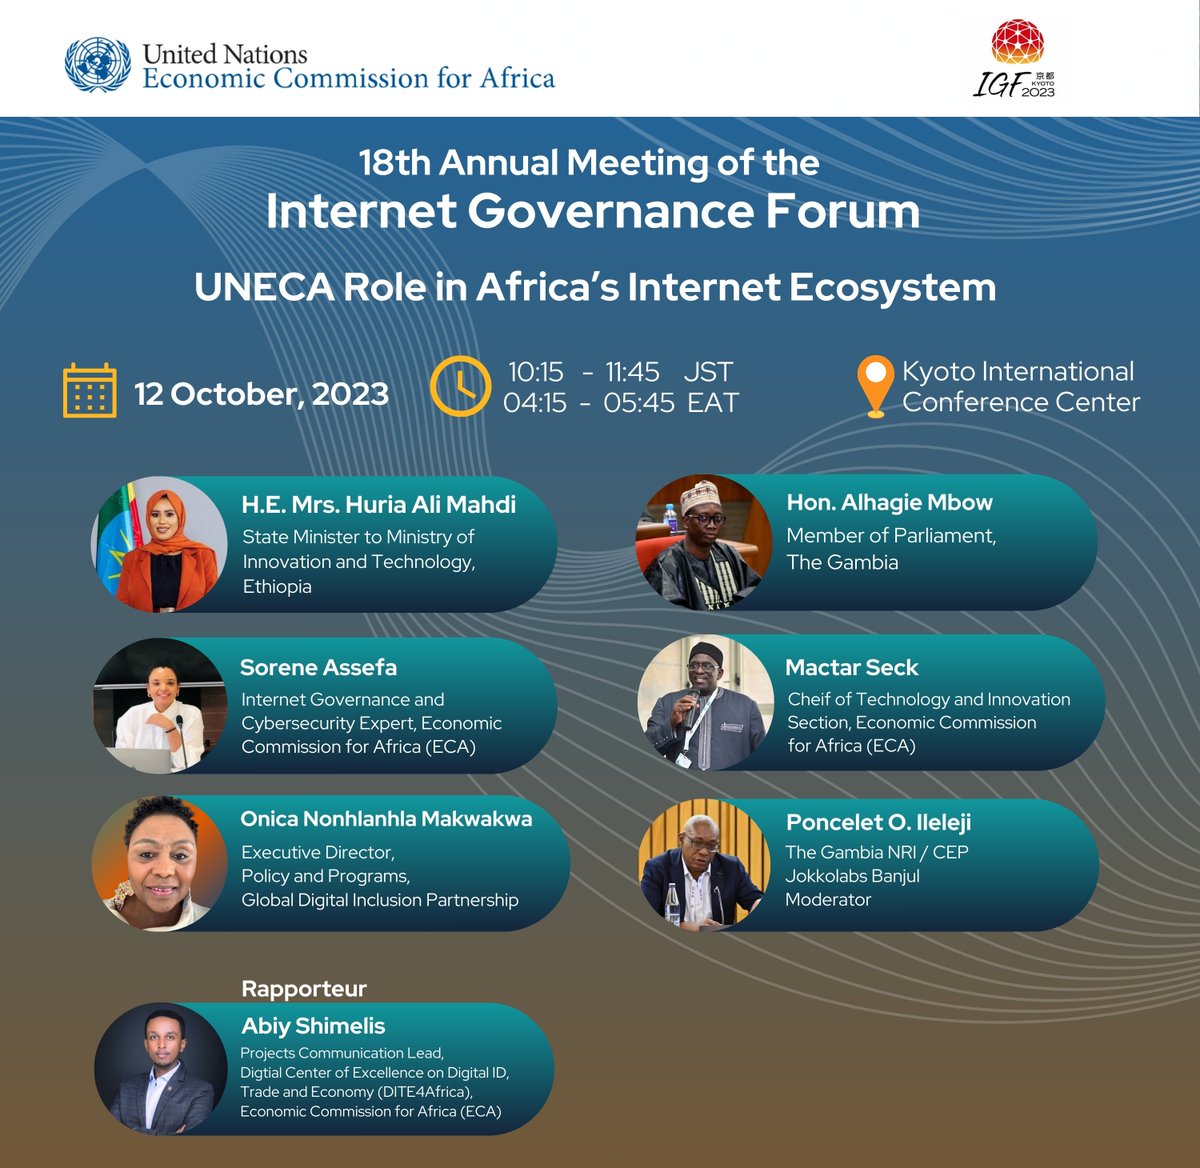 #IGF2023 Africa in-focus 

This session reflects on 'UNECA Role in Africa’s Internet Ecosystem'

How do we lay foundations for regional #Cybersecurity #DigtialInteroperability #DigitalGovernance?

🗓️12 Oct
⏲️10:15 am-11:45 JST | 4:15 am-5:45 EAT
🔗Join Us tinyurl.com/msdfeyhu